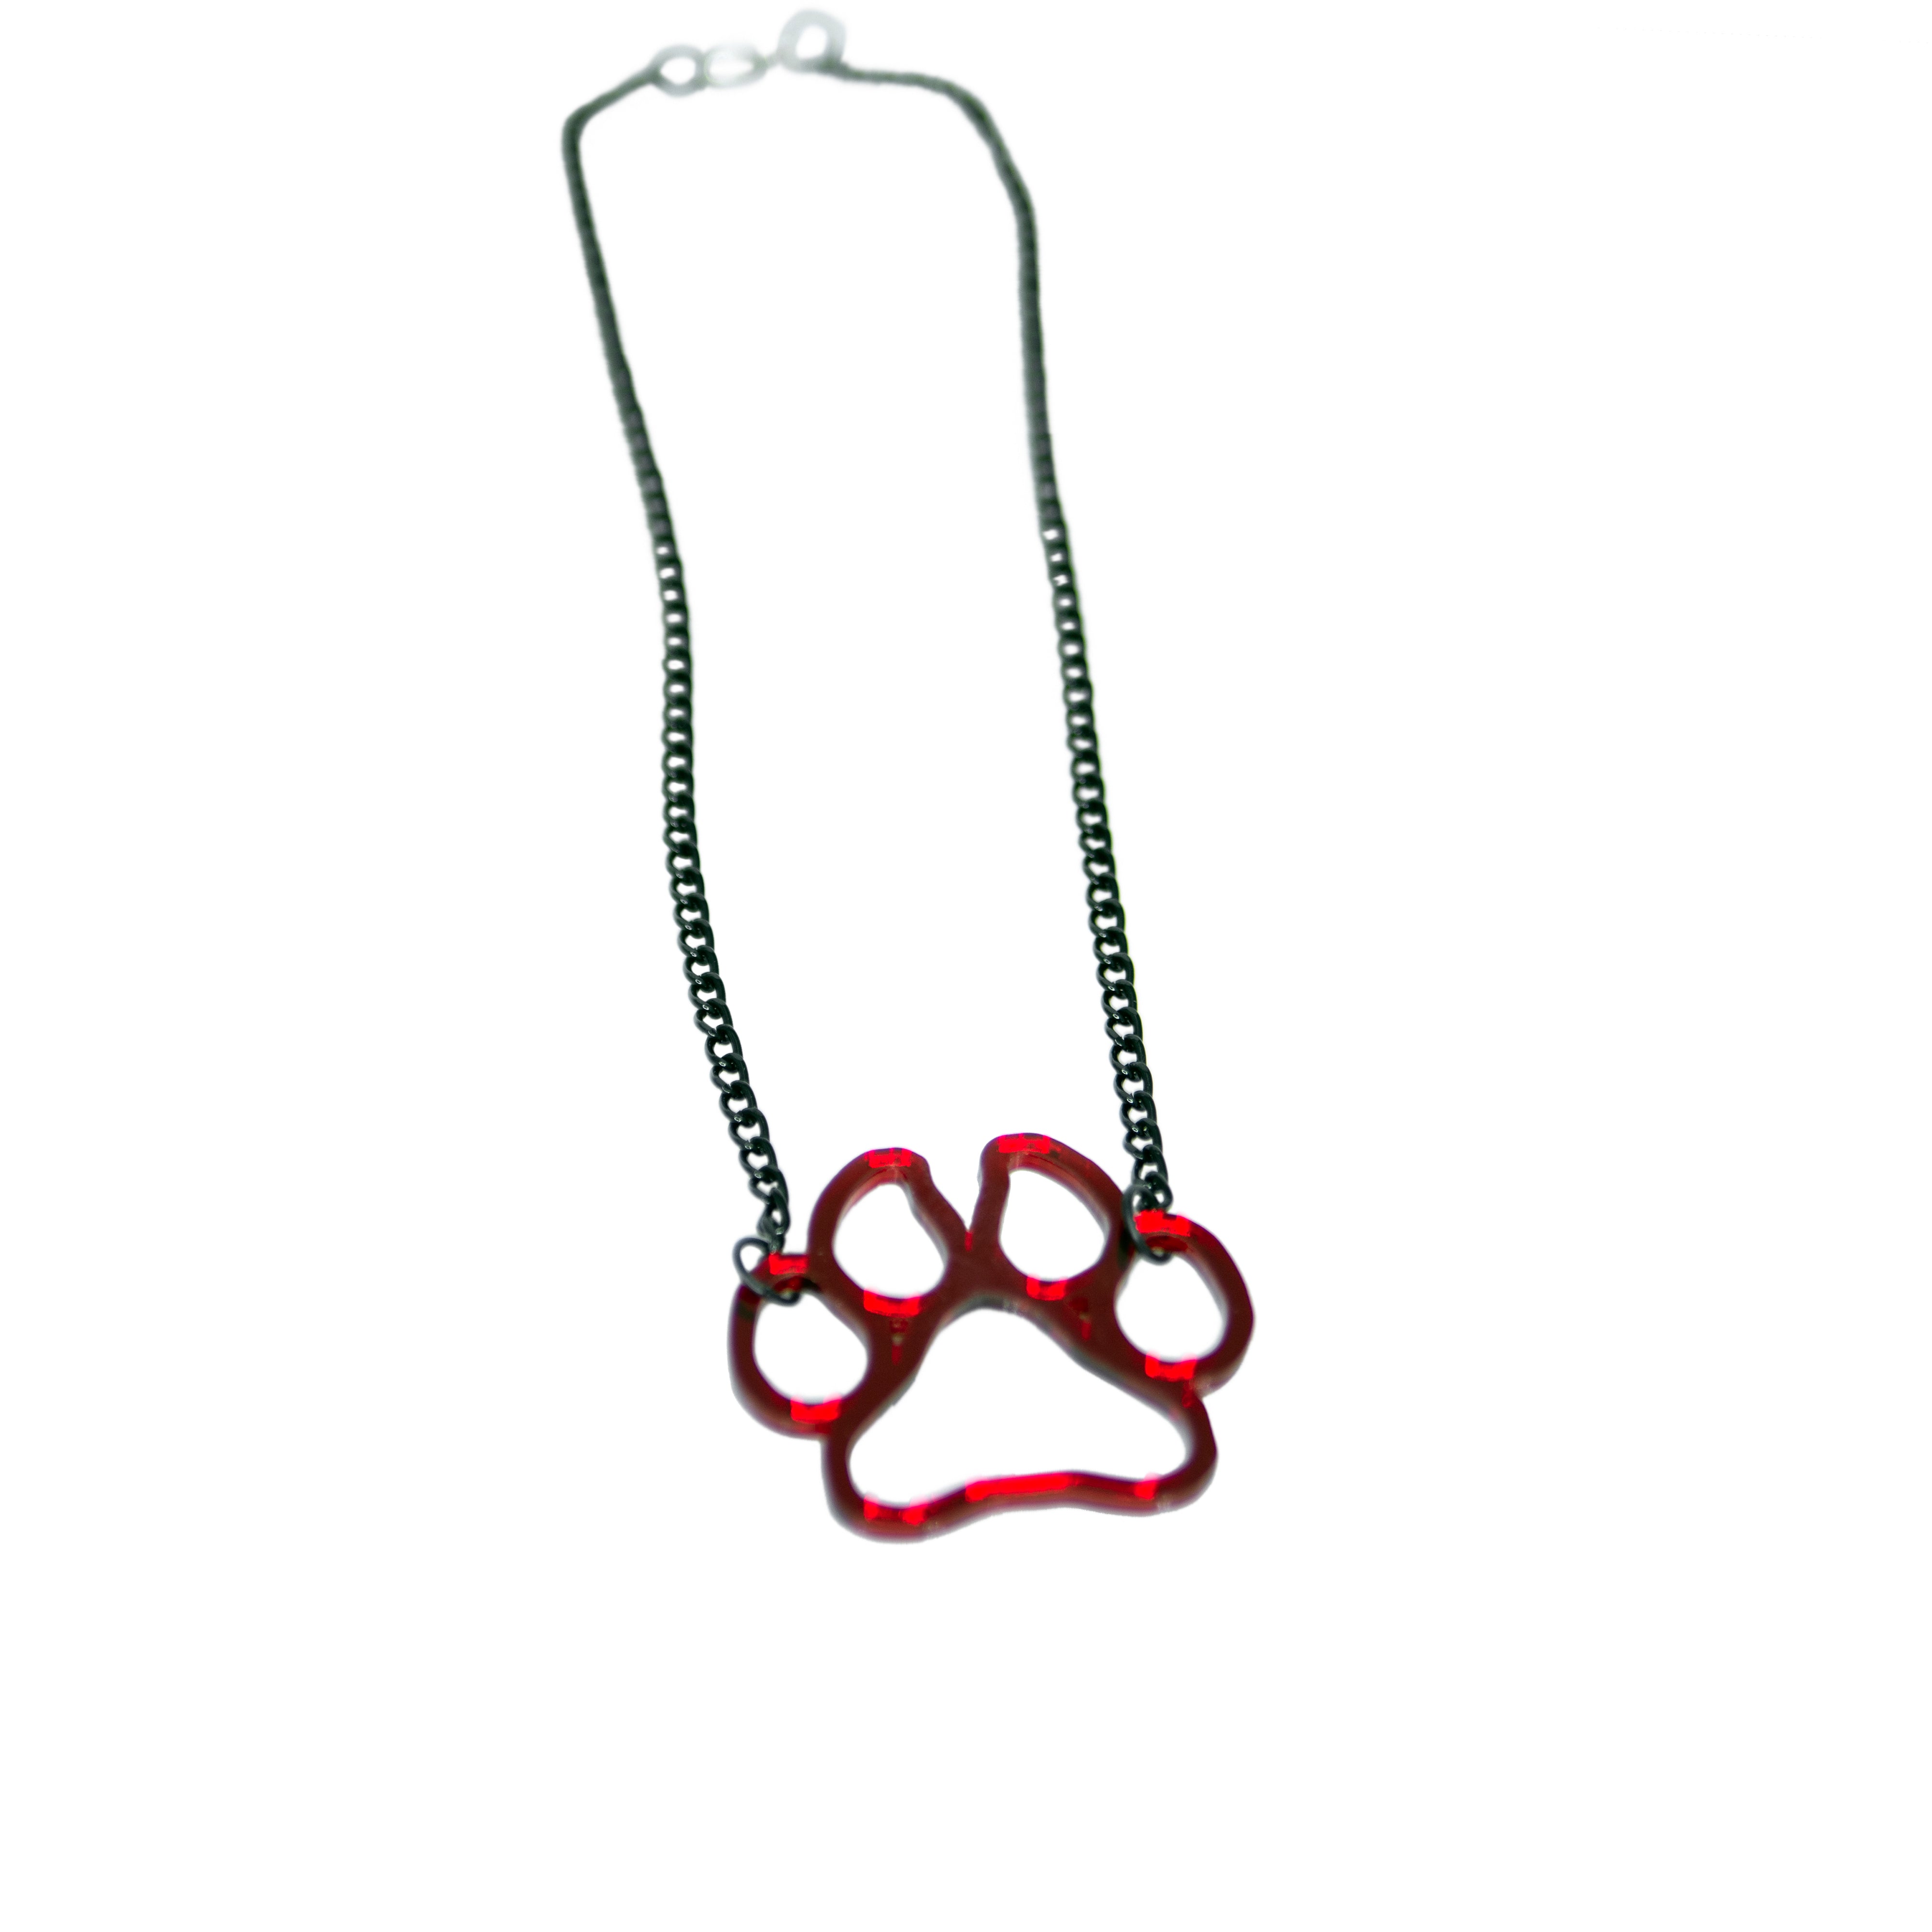 Paw Knucks Bit Necklace - Pawstar Pawstar Necklaces cosplay, costume, Cutebits, furry, ship-15, ship-15day